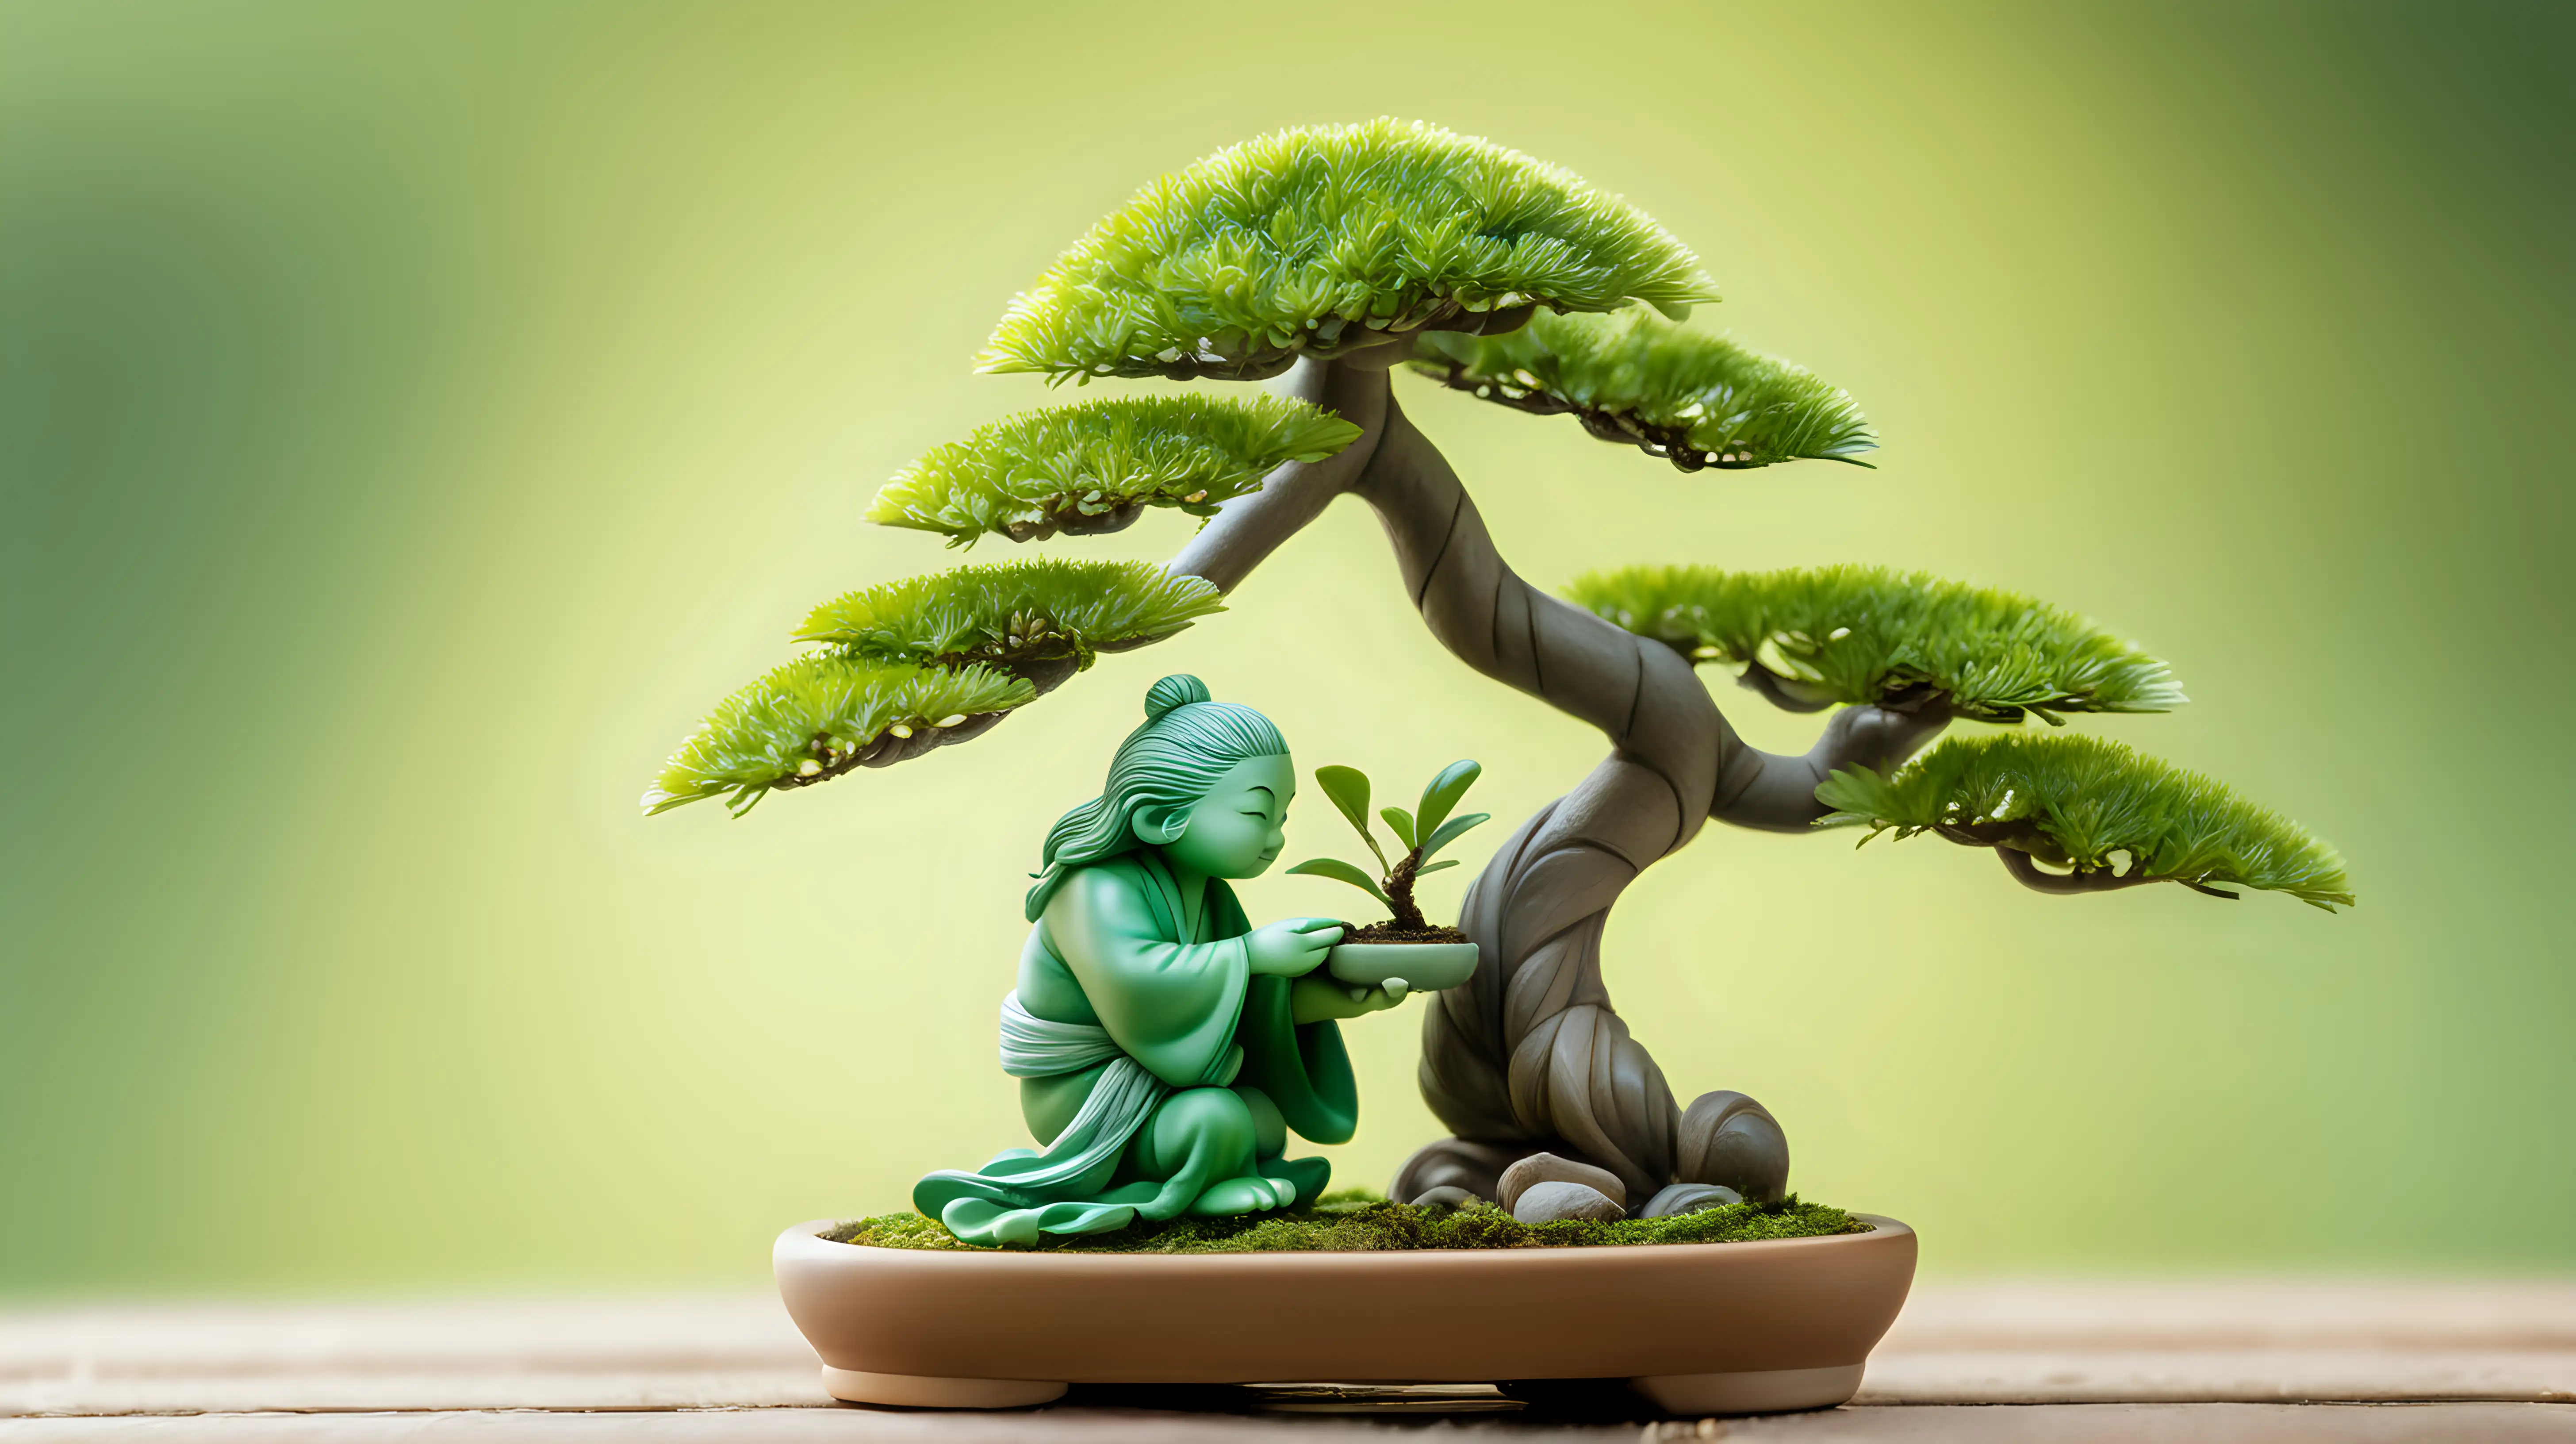 Charming Green Creature Perfecting Bonsai Art with Precise Trimming